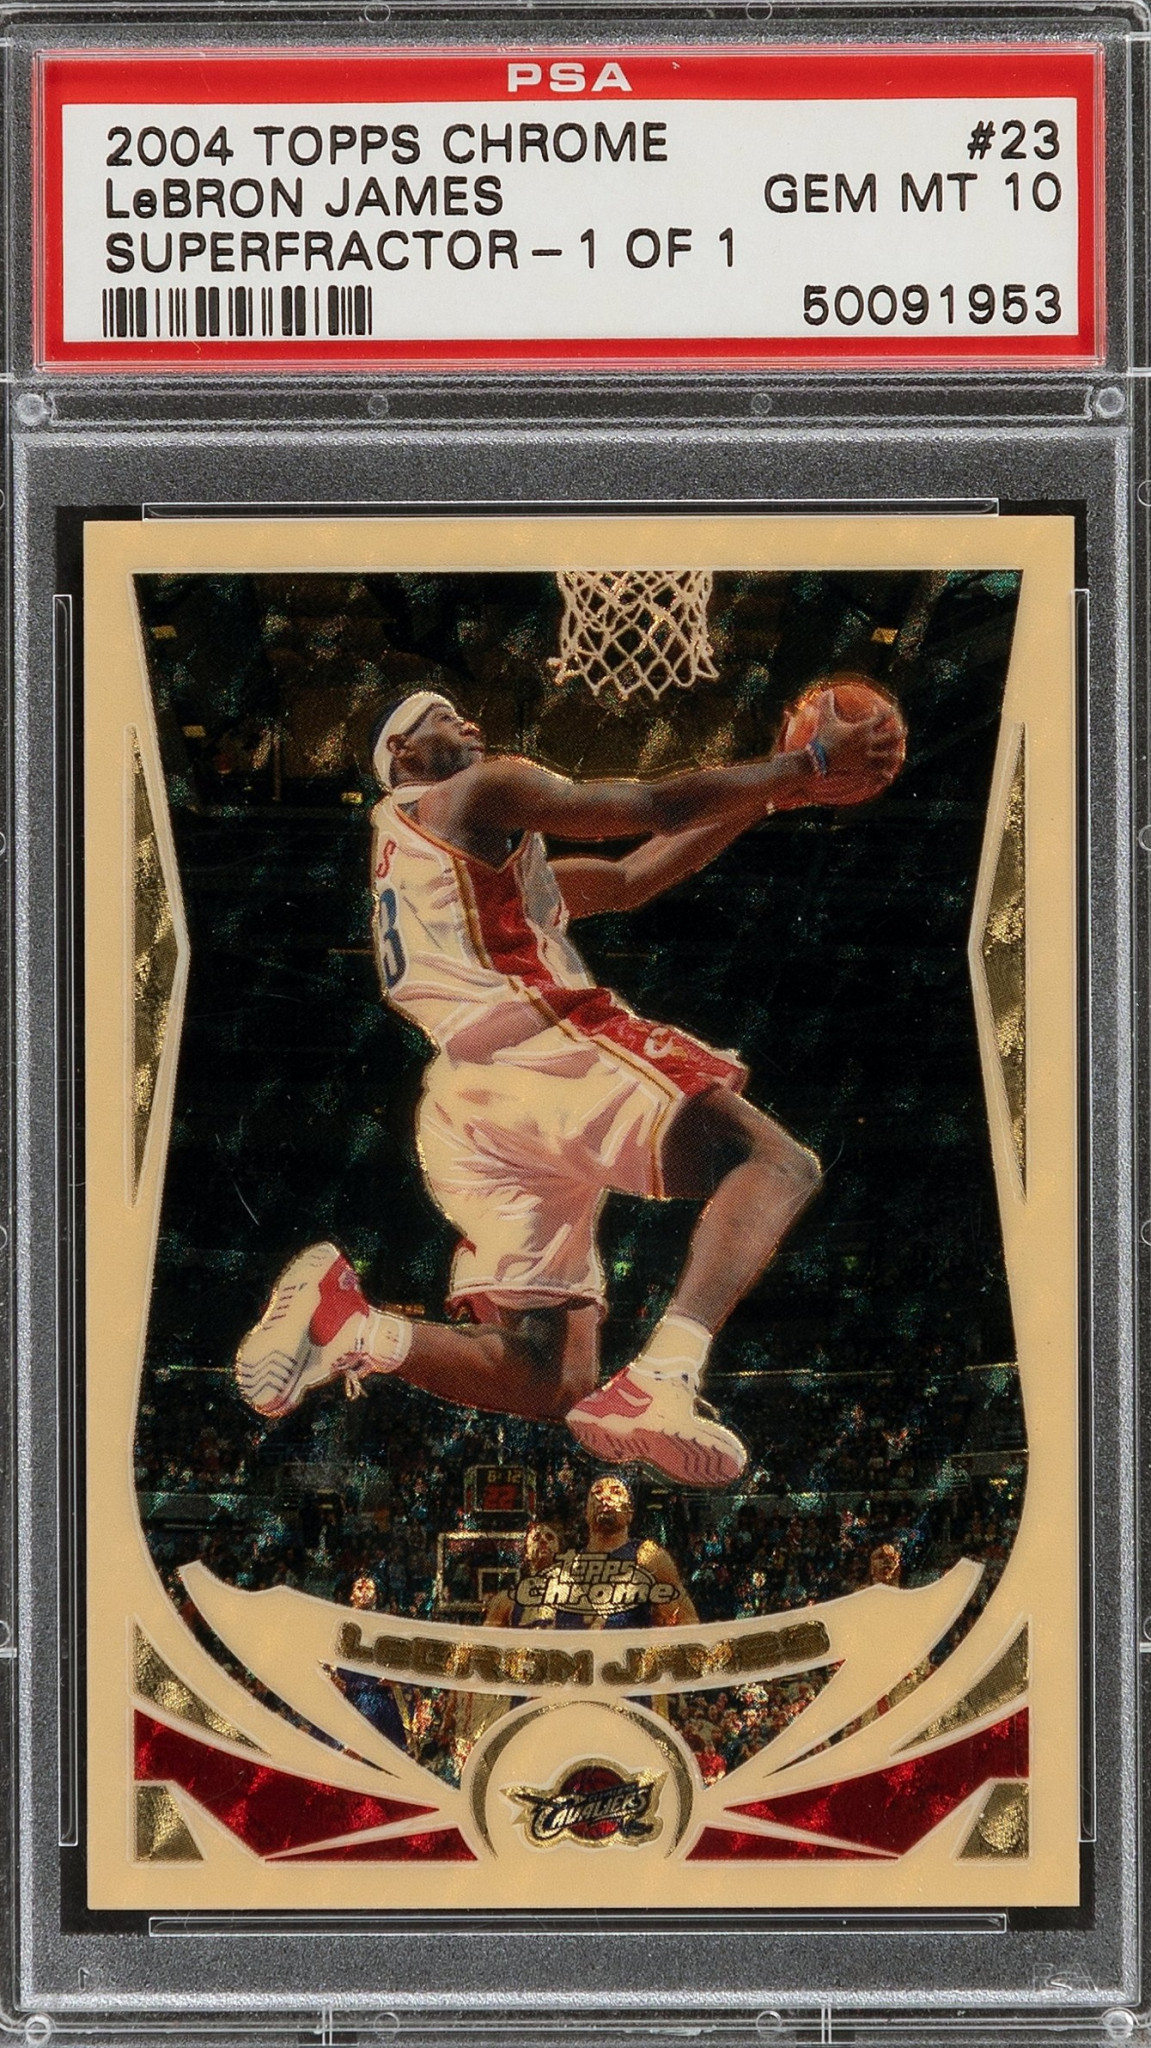 A Topps Chrome trading card from 2004 featuring LeBron James has sold for $720,000 - more than half-a-million dollars above the pre-sale estimate ©Heritage Auctions